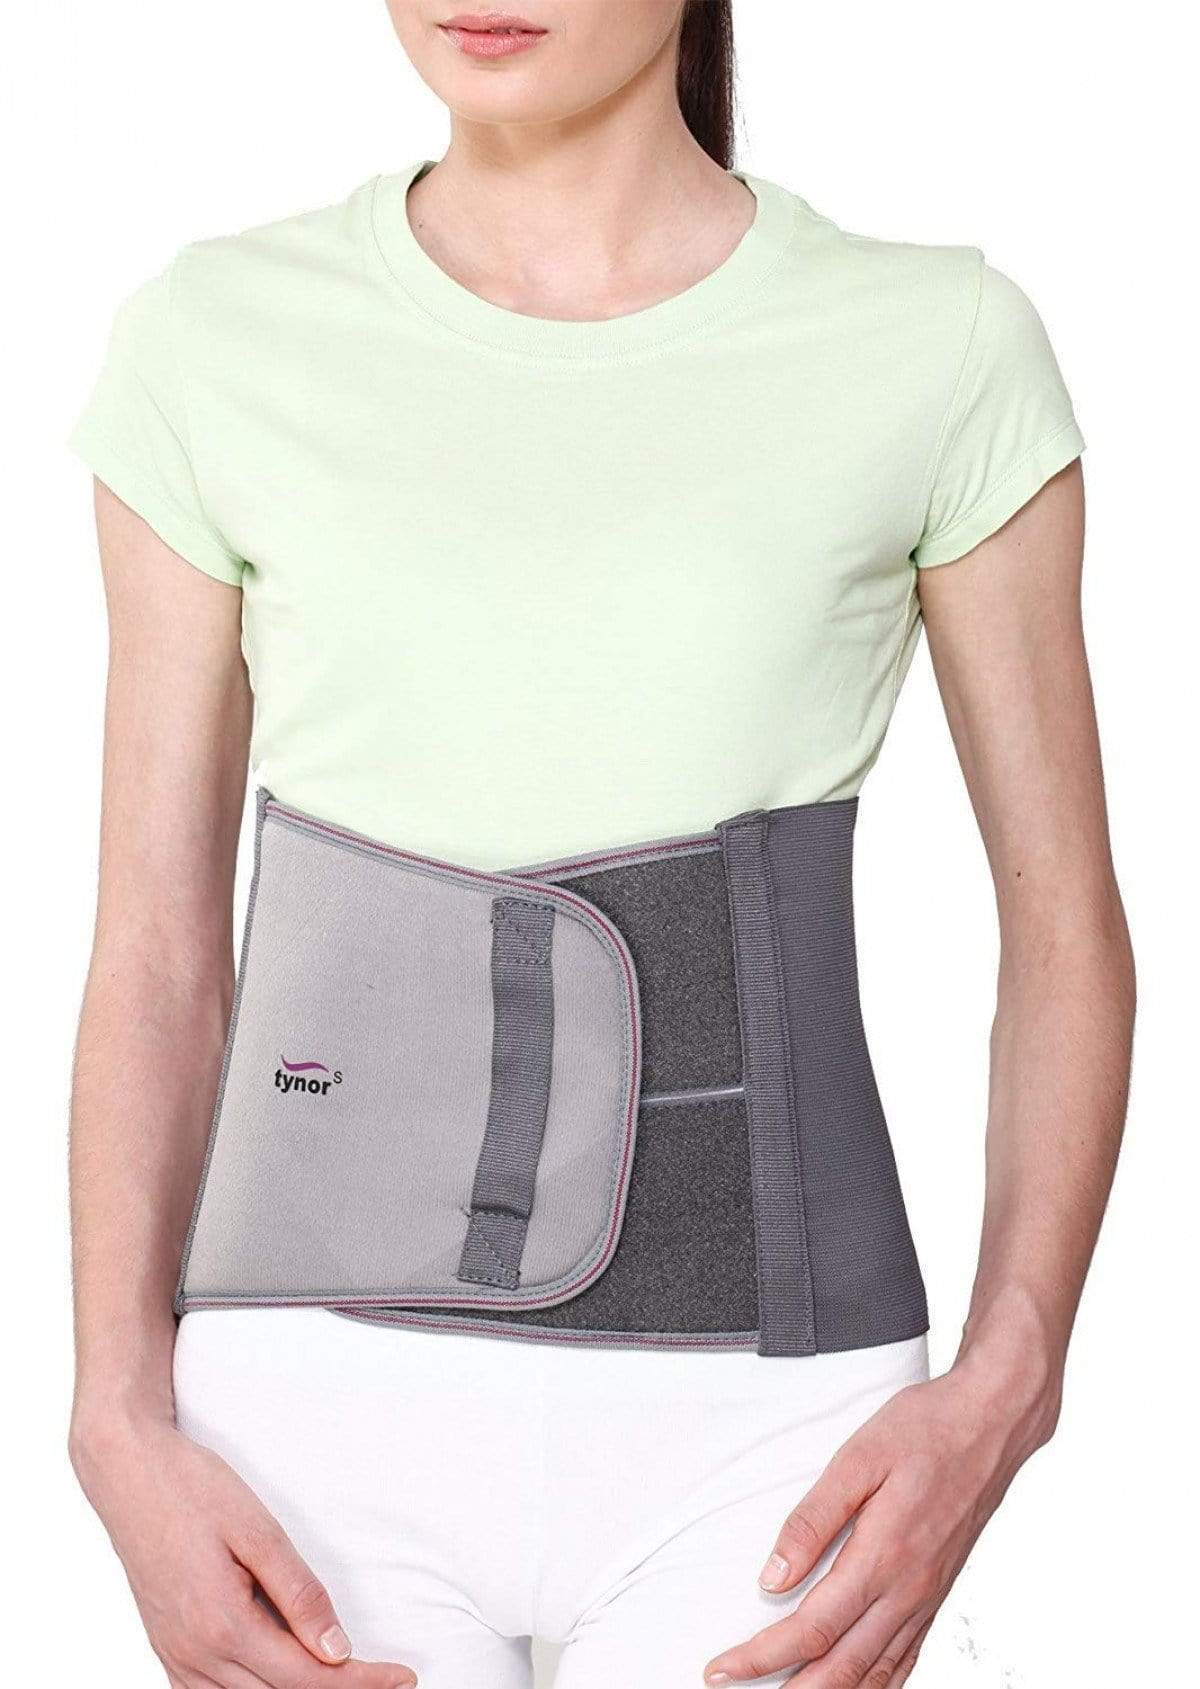 Buy original Tynor Abdominal Support for Post Operative/ Pregnancy Care  (Large) for Rs. 404.25